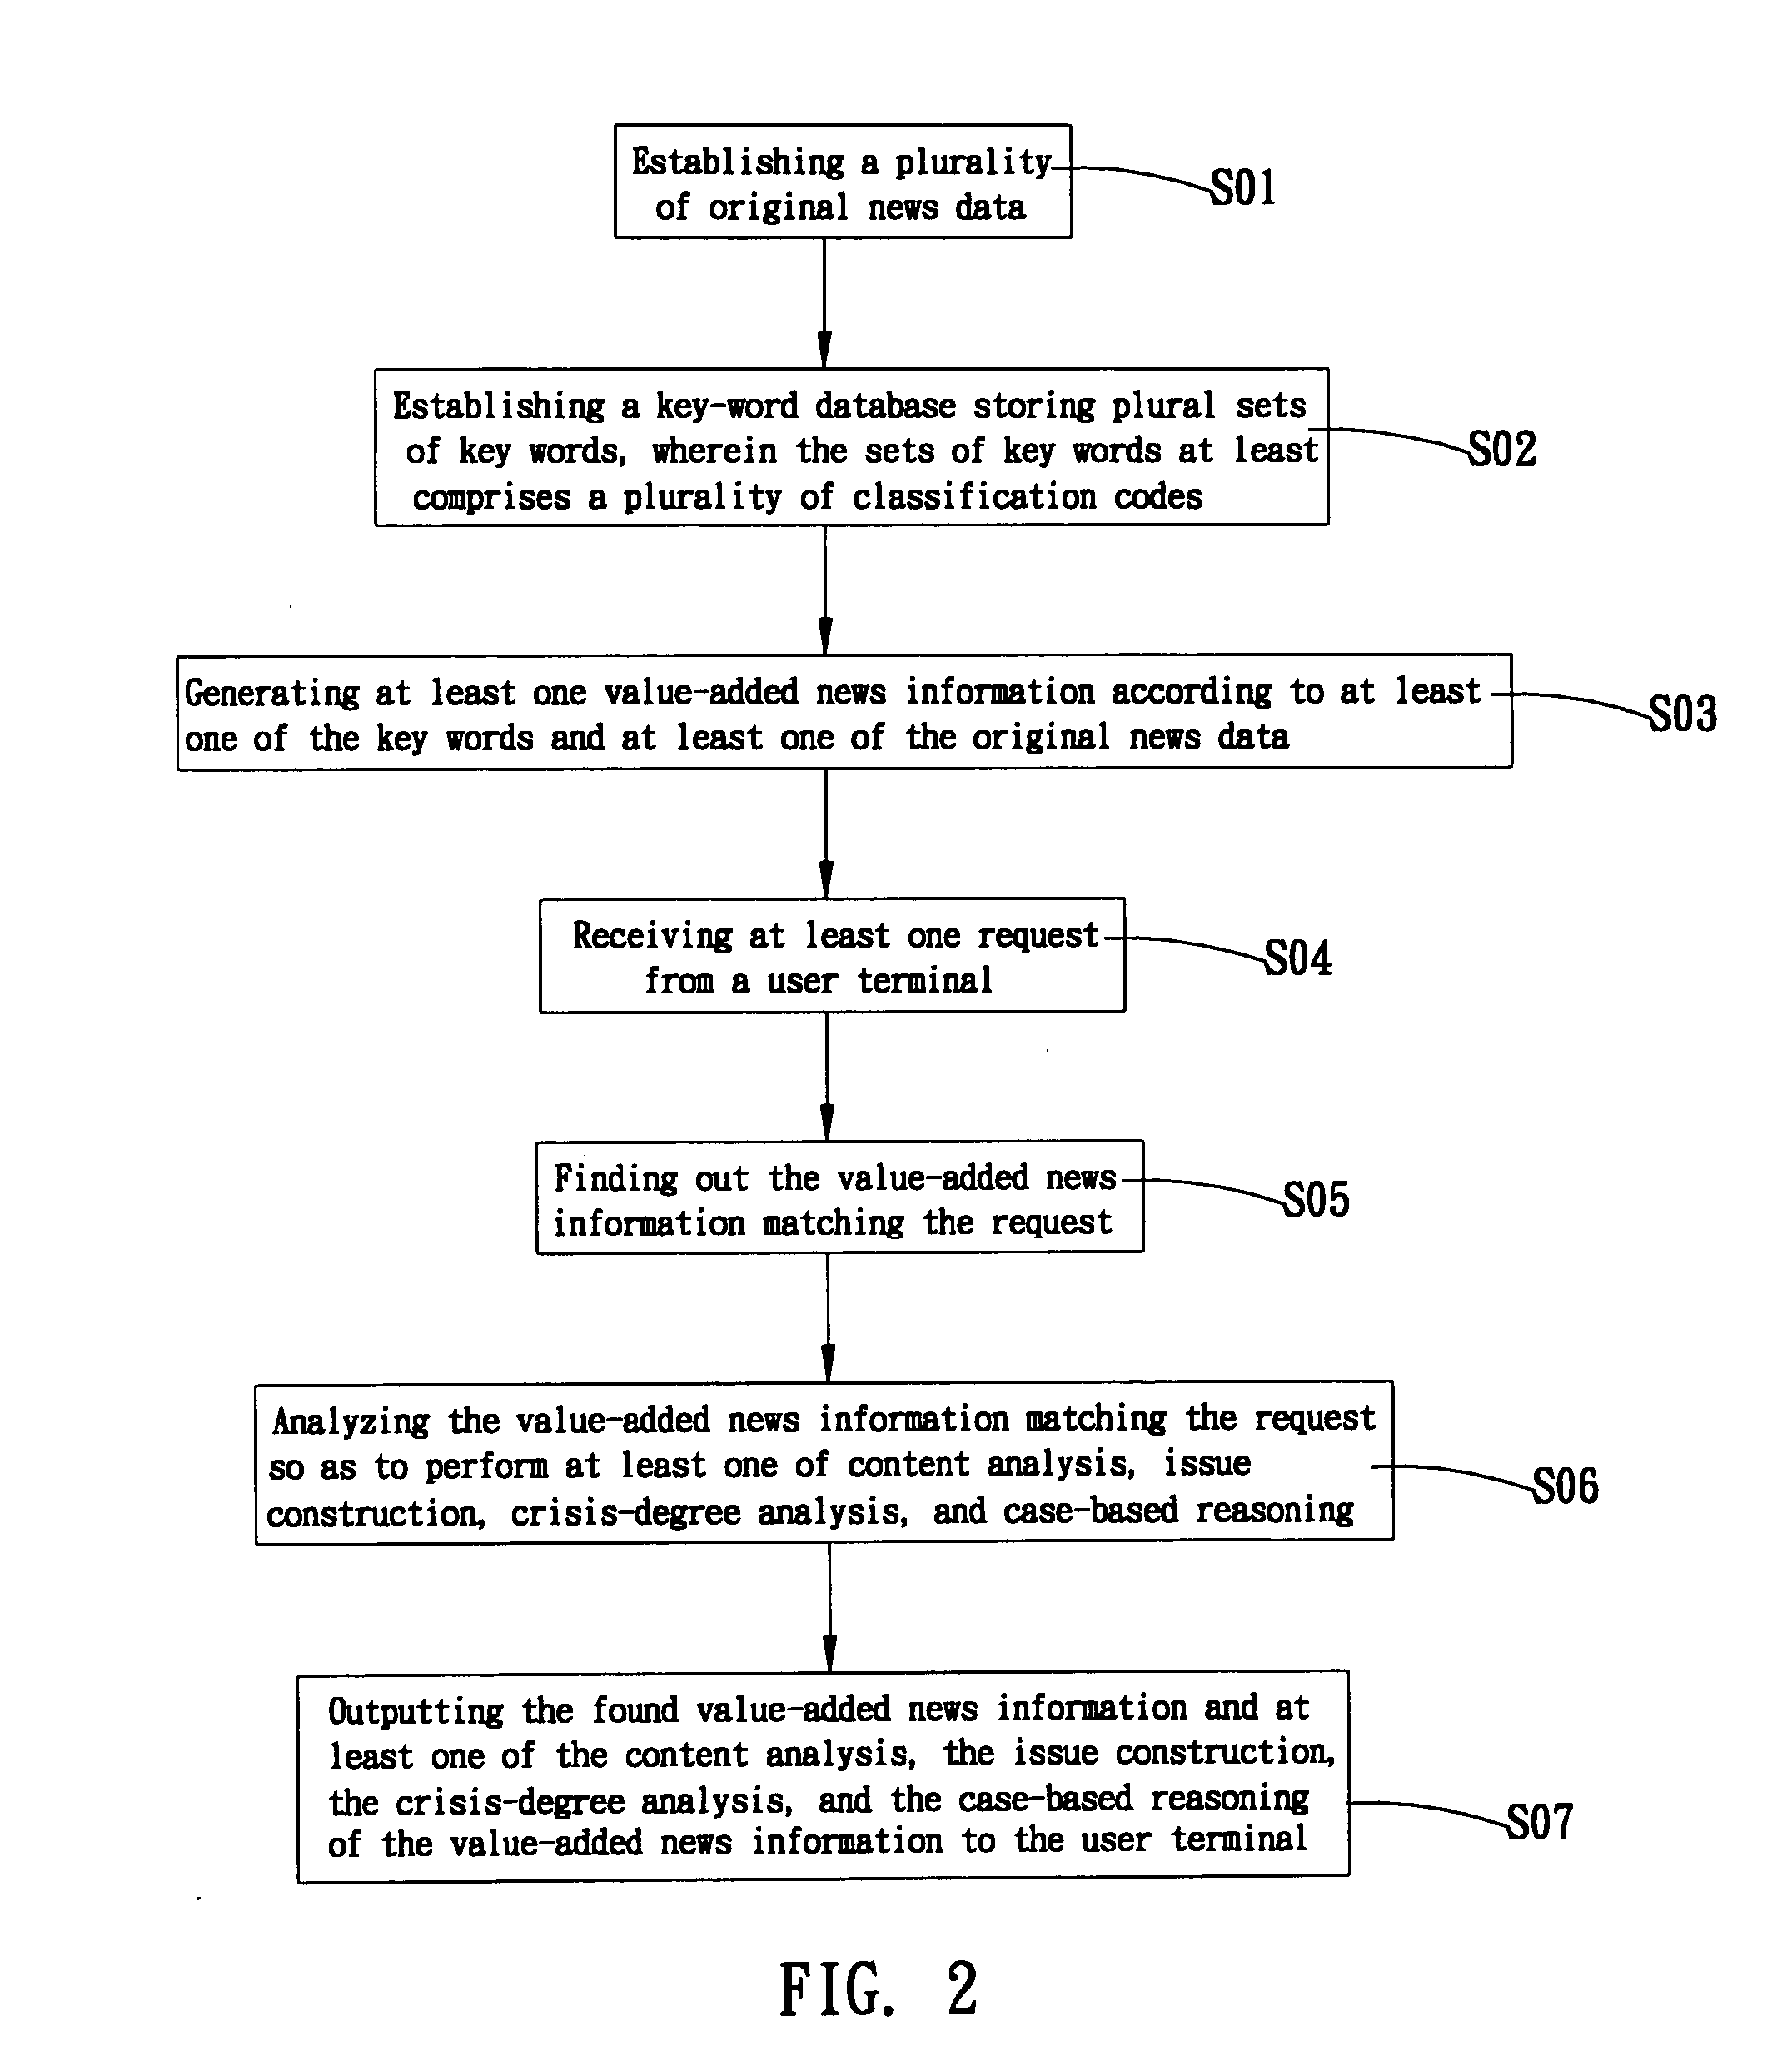 System and method for providing news service